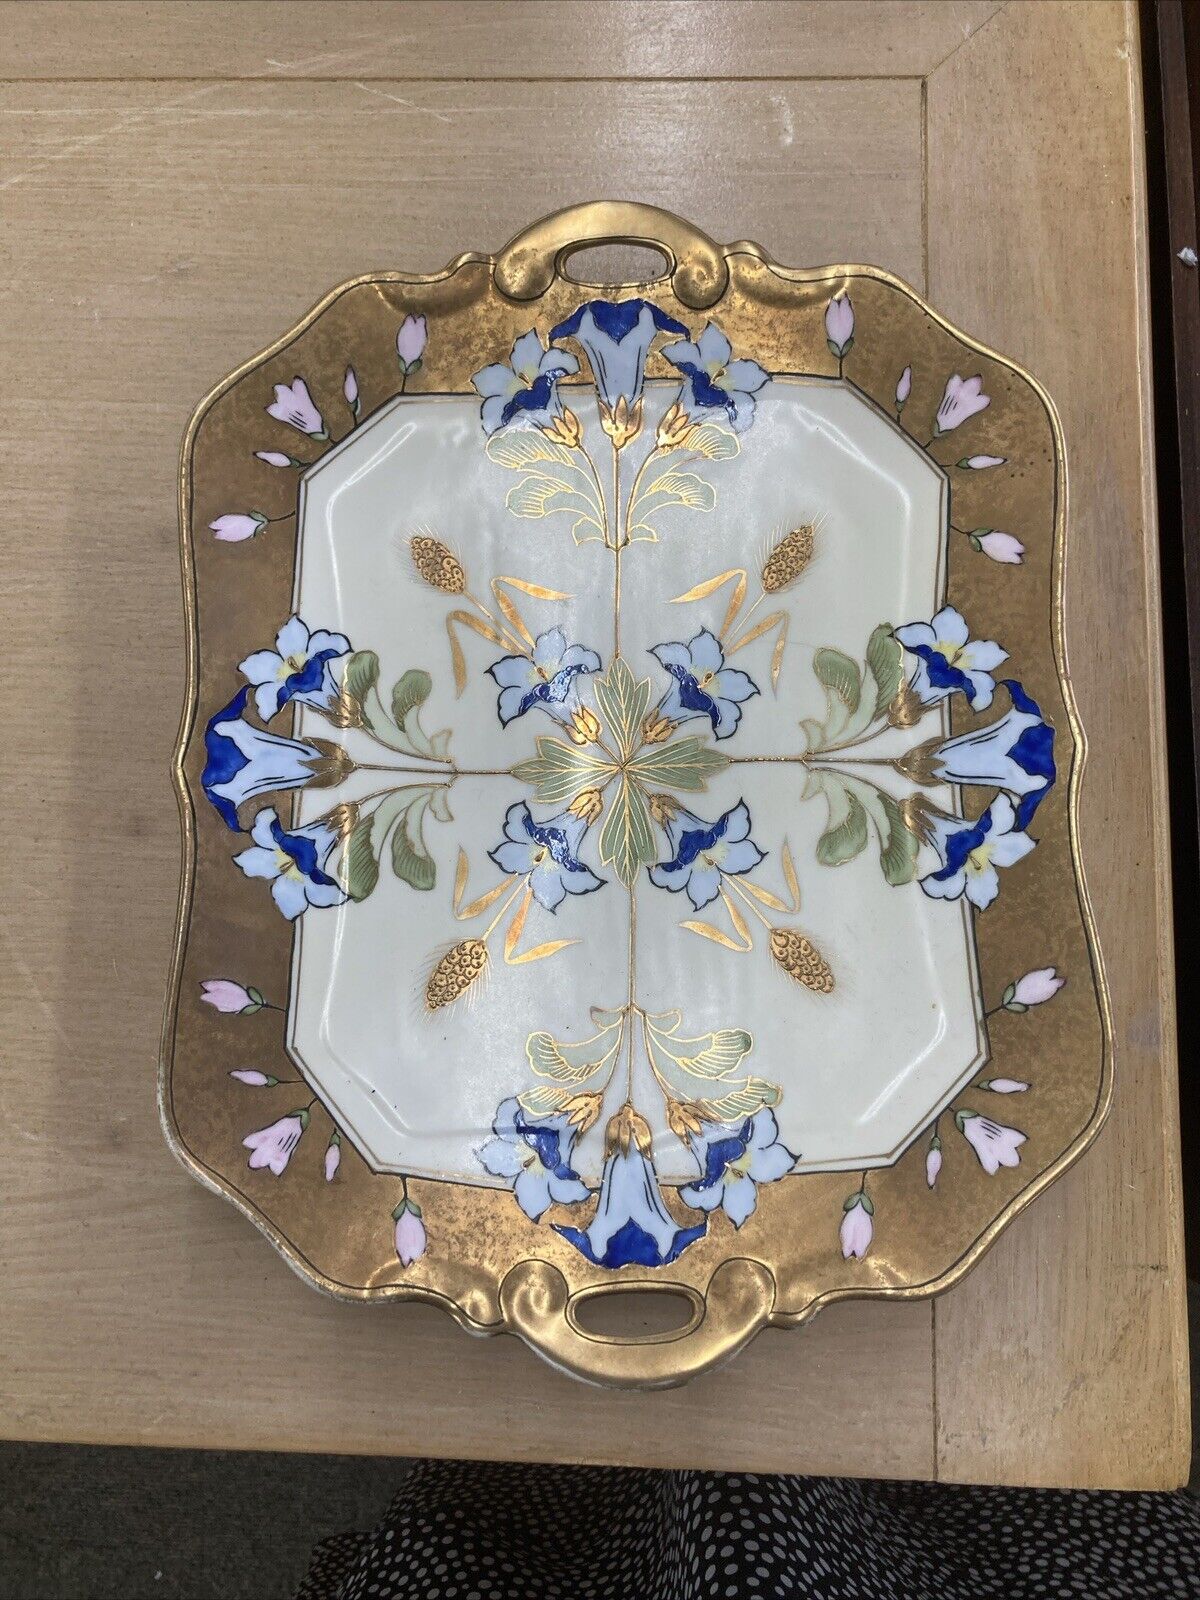 Vintage Noritake Morimura Bros Brothers Hand Painted Dresser Tray Floral & Wheat